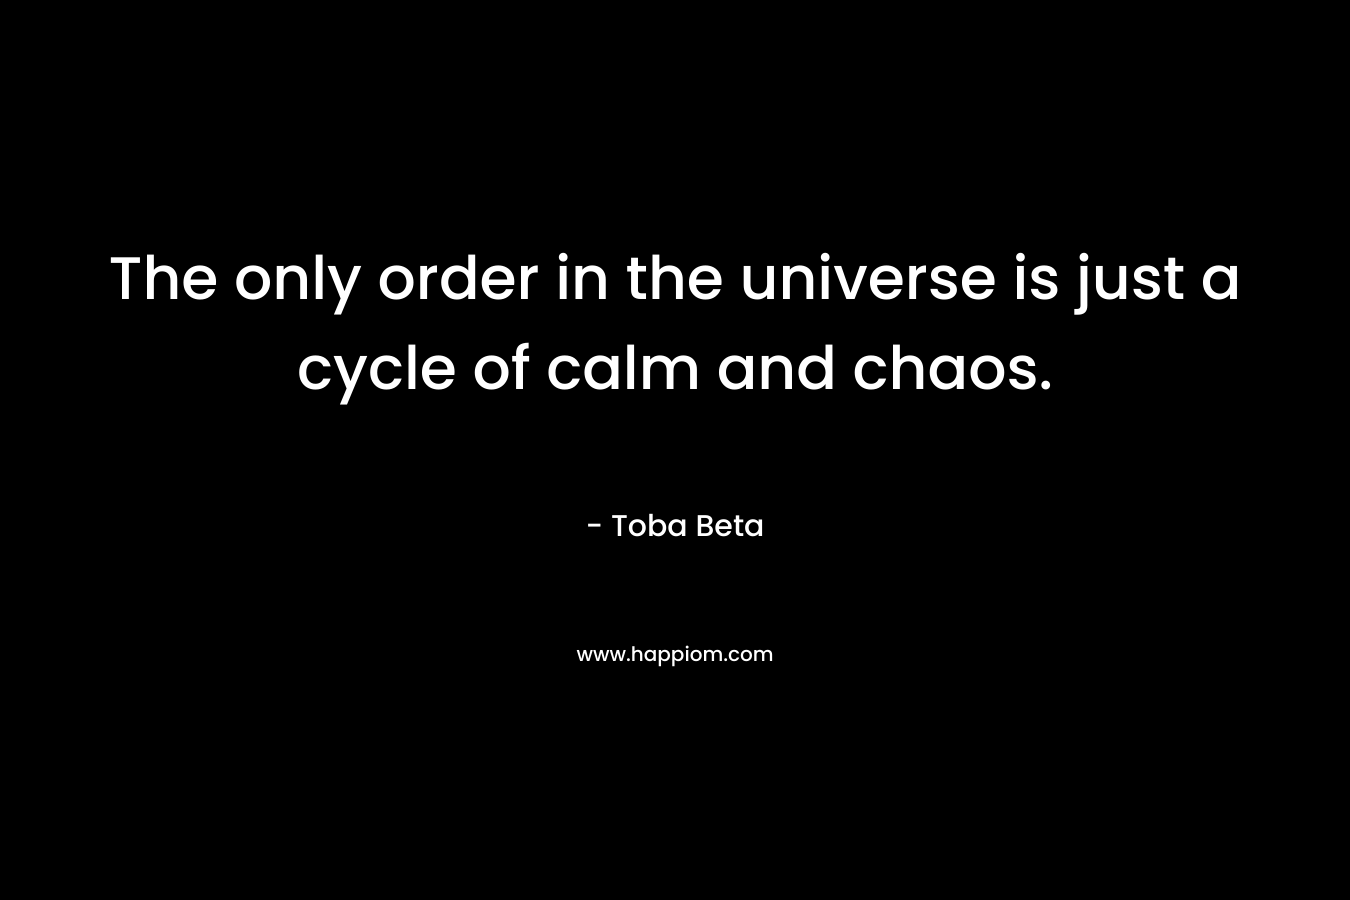 The only order in the universe is just a cycle of calm and chaos. – Toba Beta